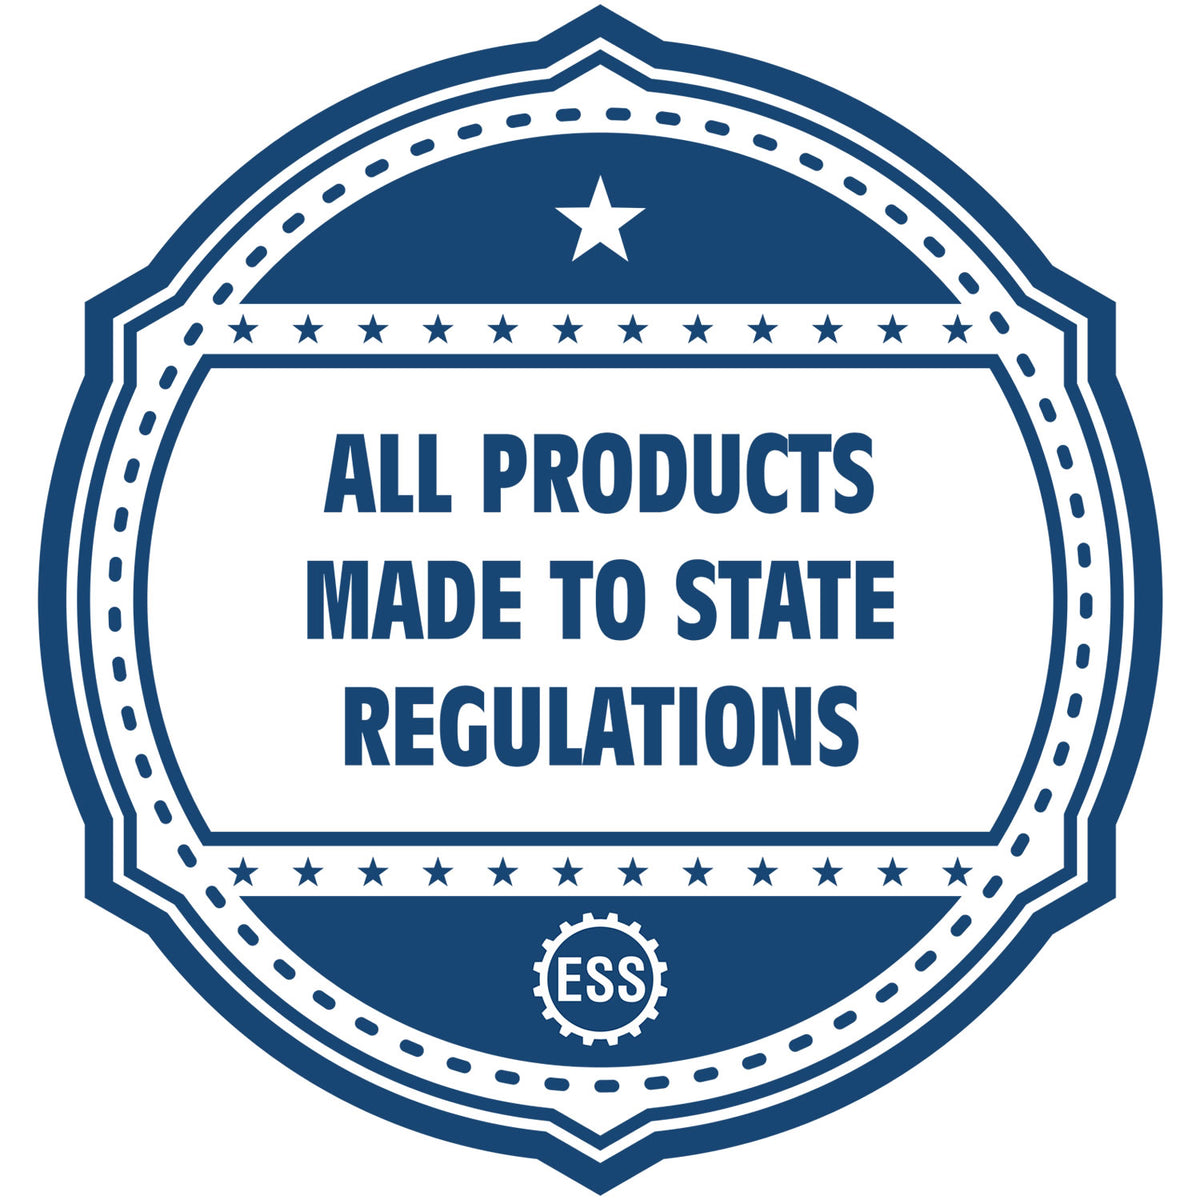 An icon or badge element for the Super Slim Nebraska Notary Public Stamp showing that this product is made in compliance with state regulations.